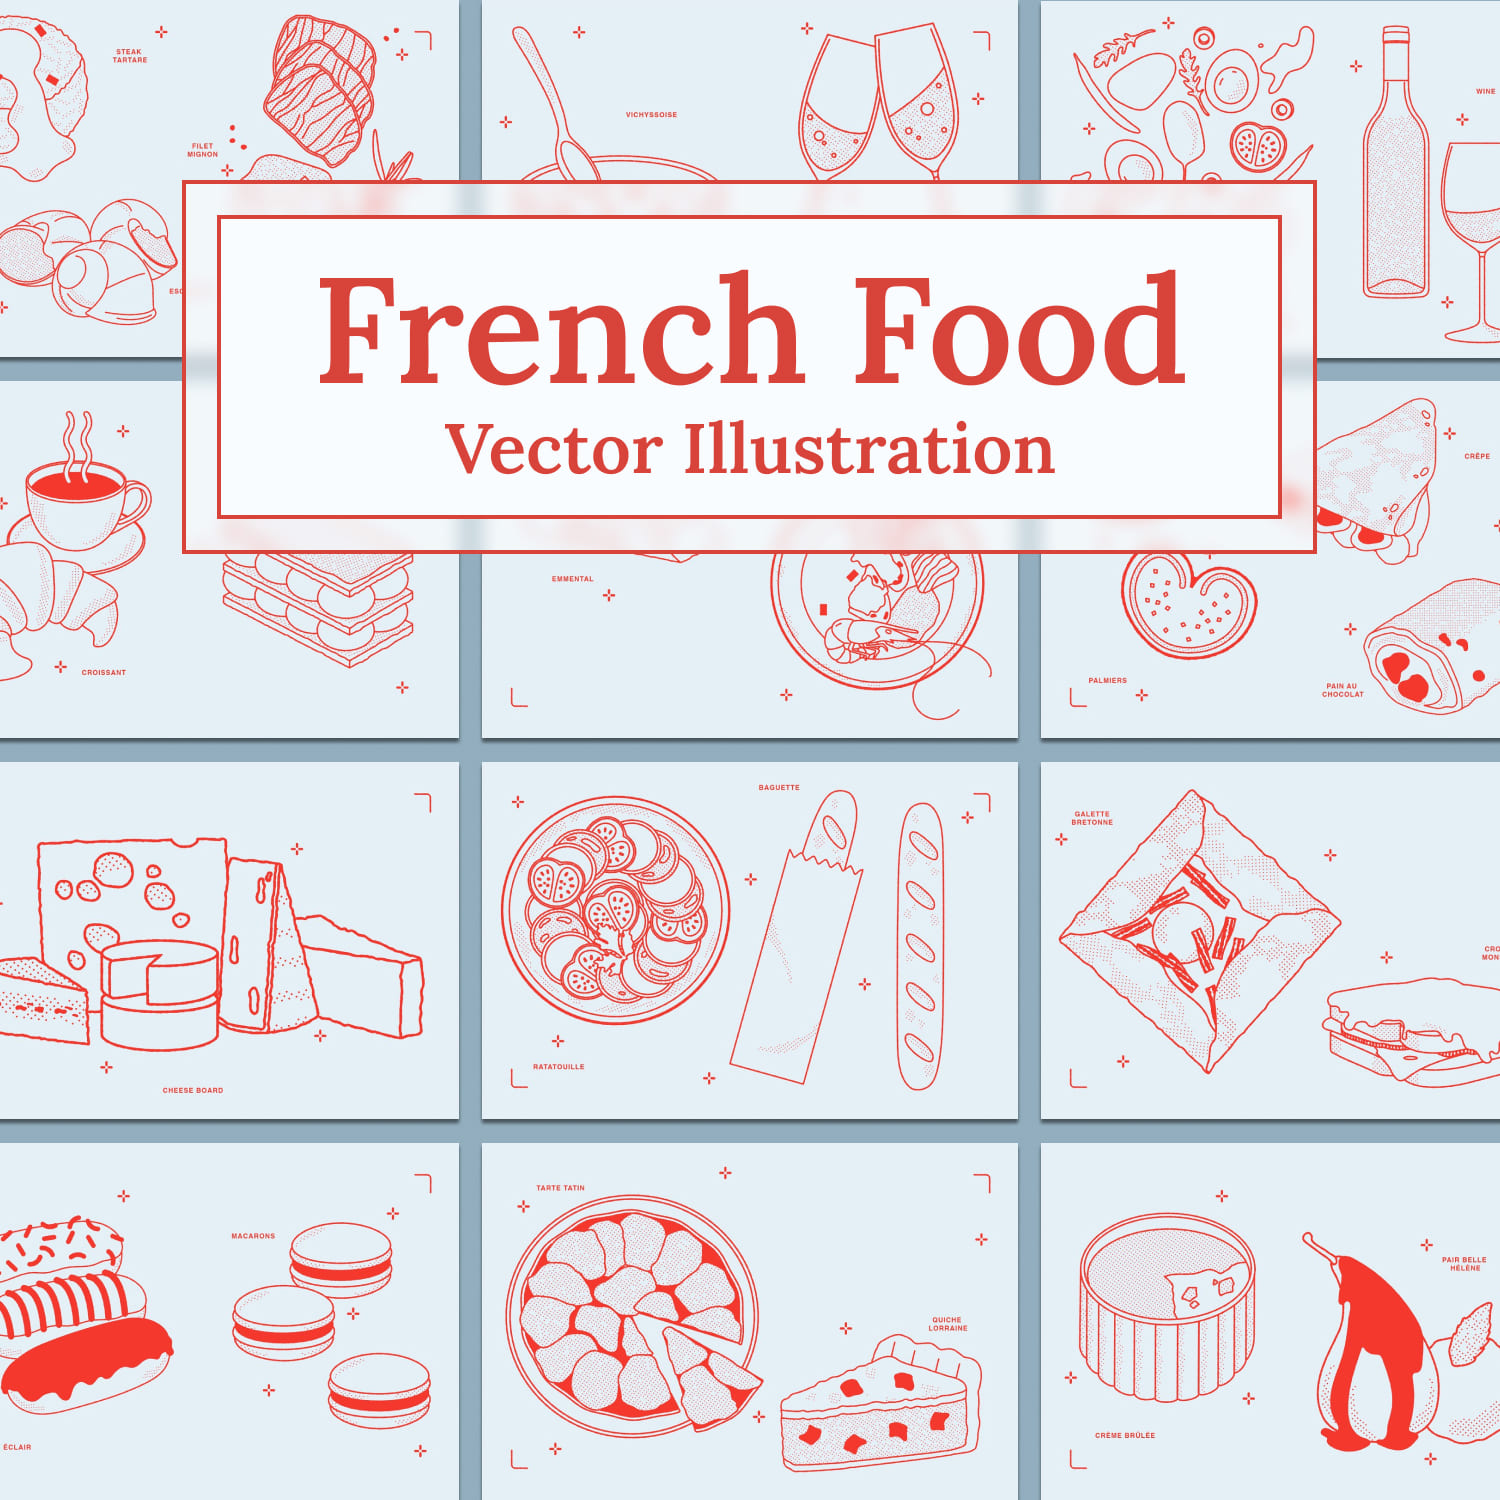 French food vector illustration - main image preview.